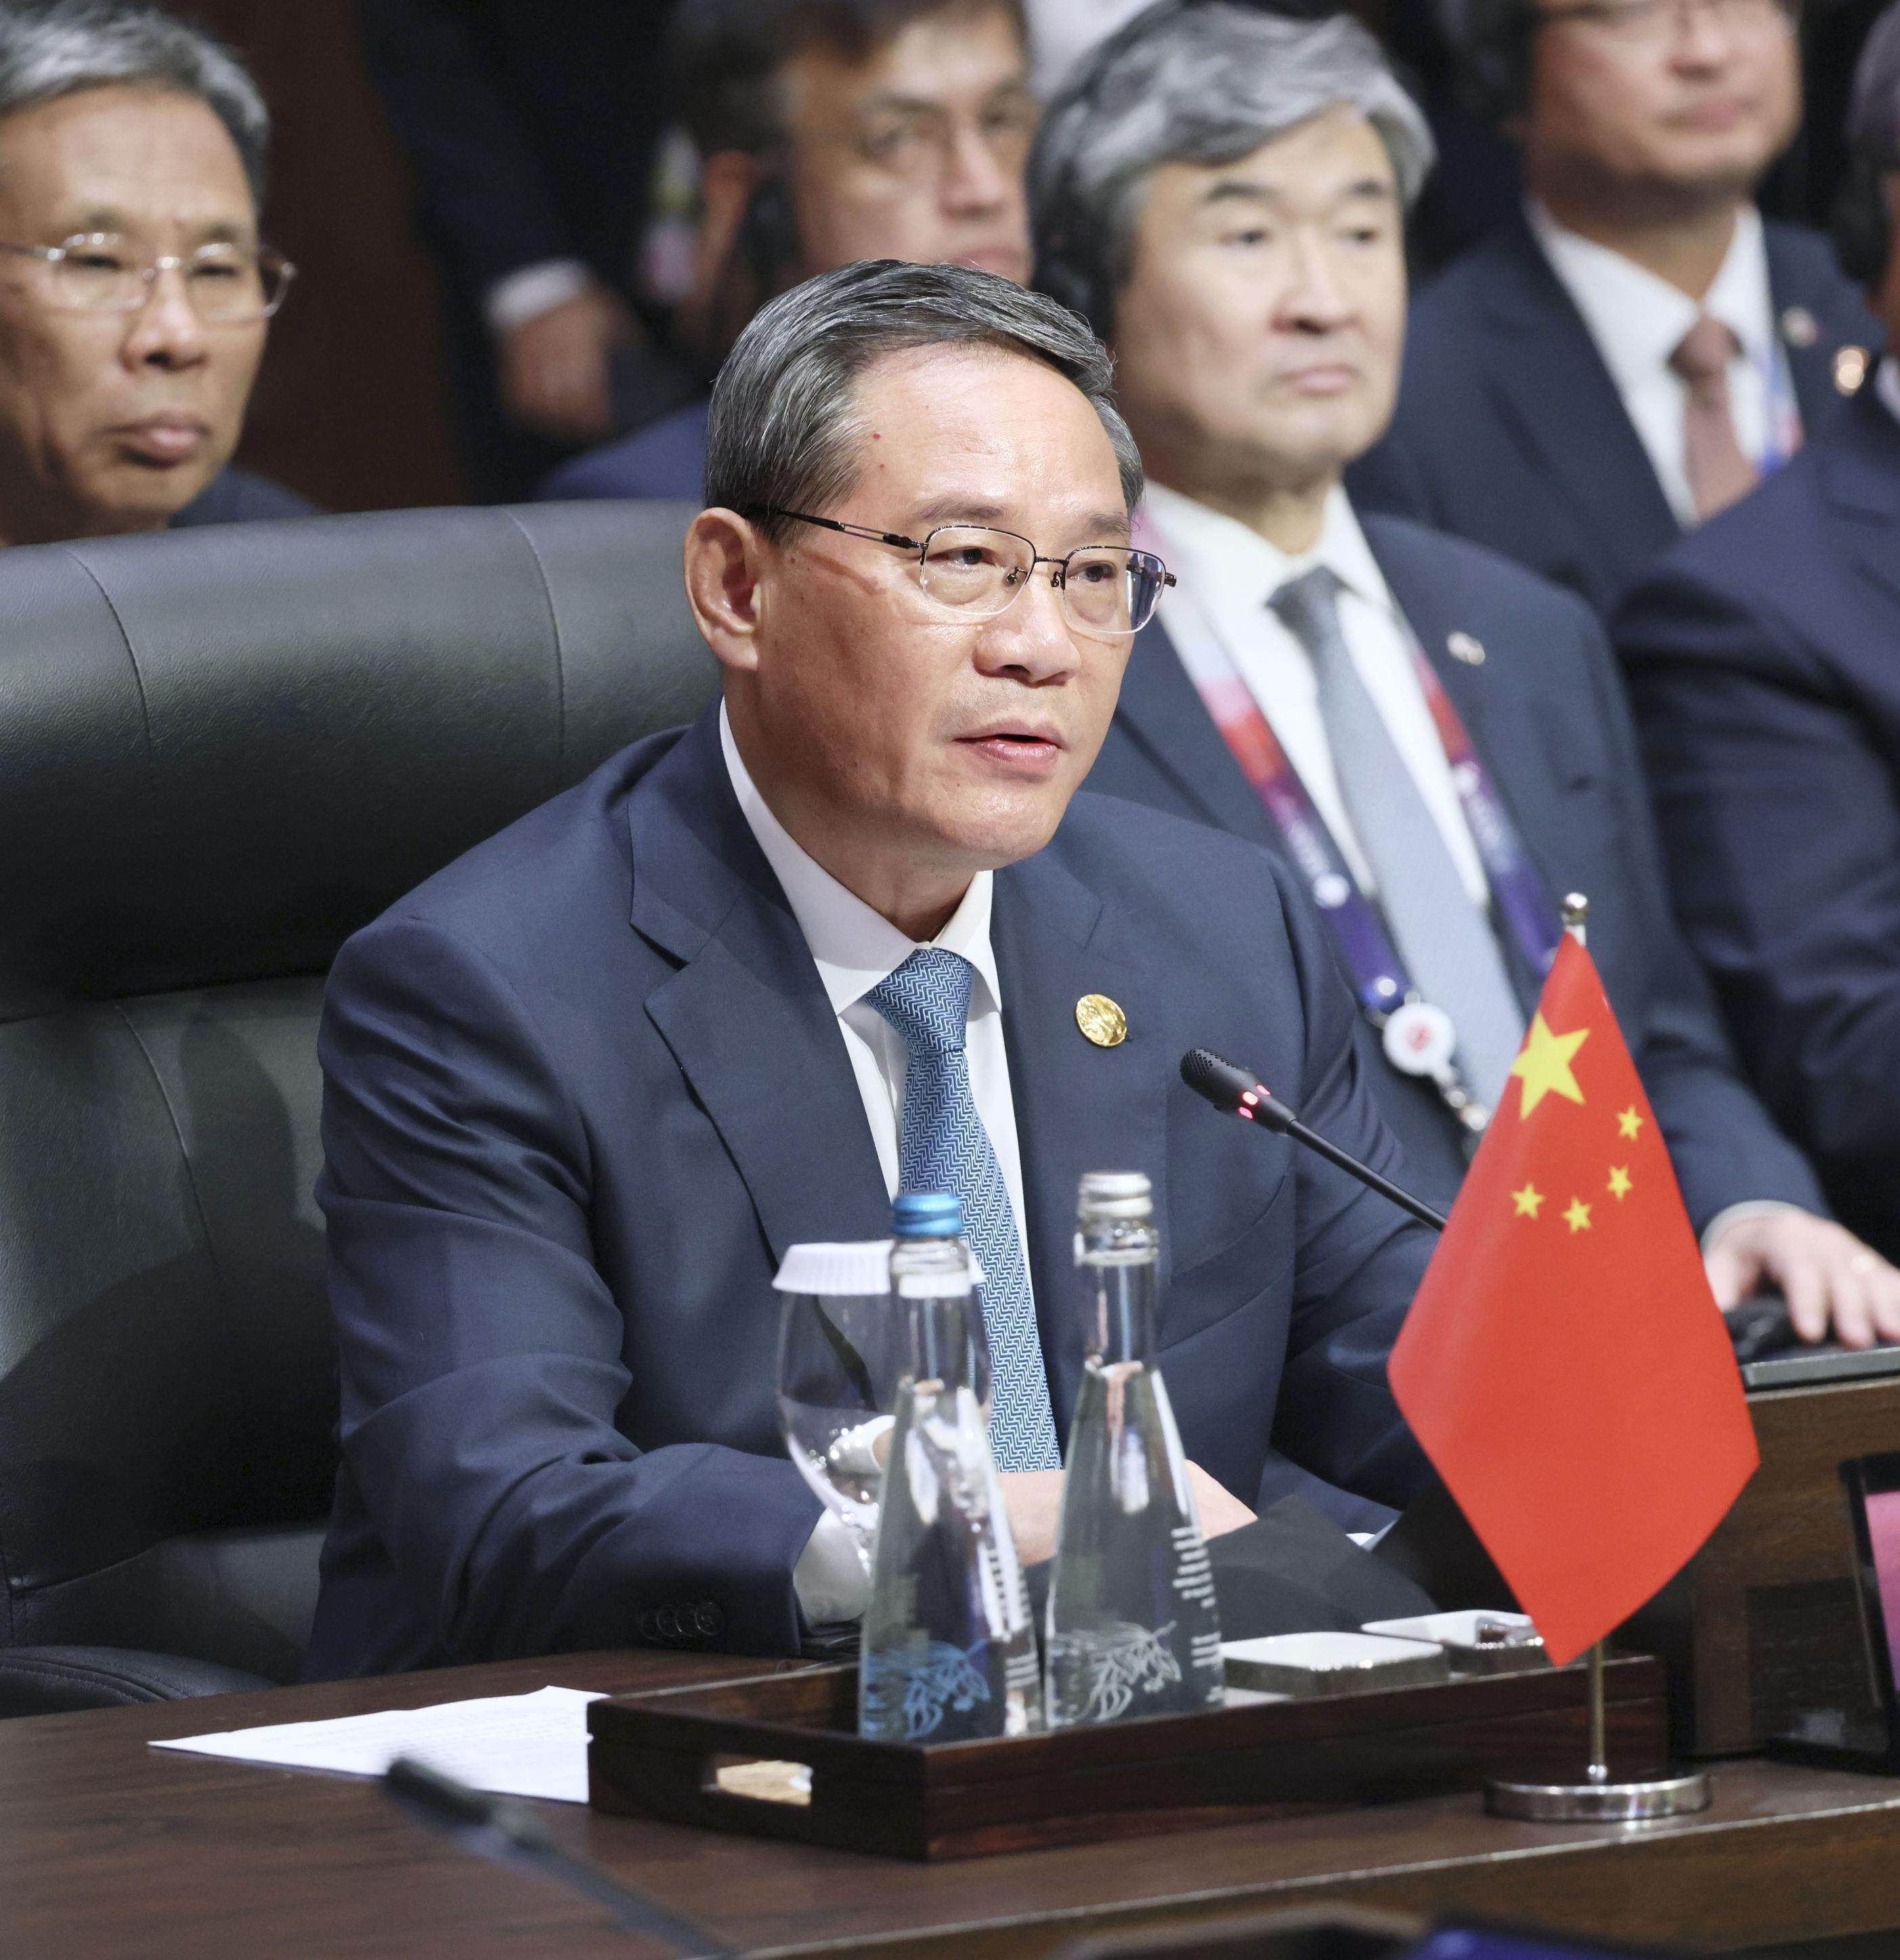 Premier Li Qiang has expressed China’s willingness to jointly  build a relationship with Japan that “meets the requirements of the new era”. Photo: Kyodo